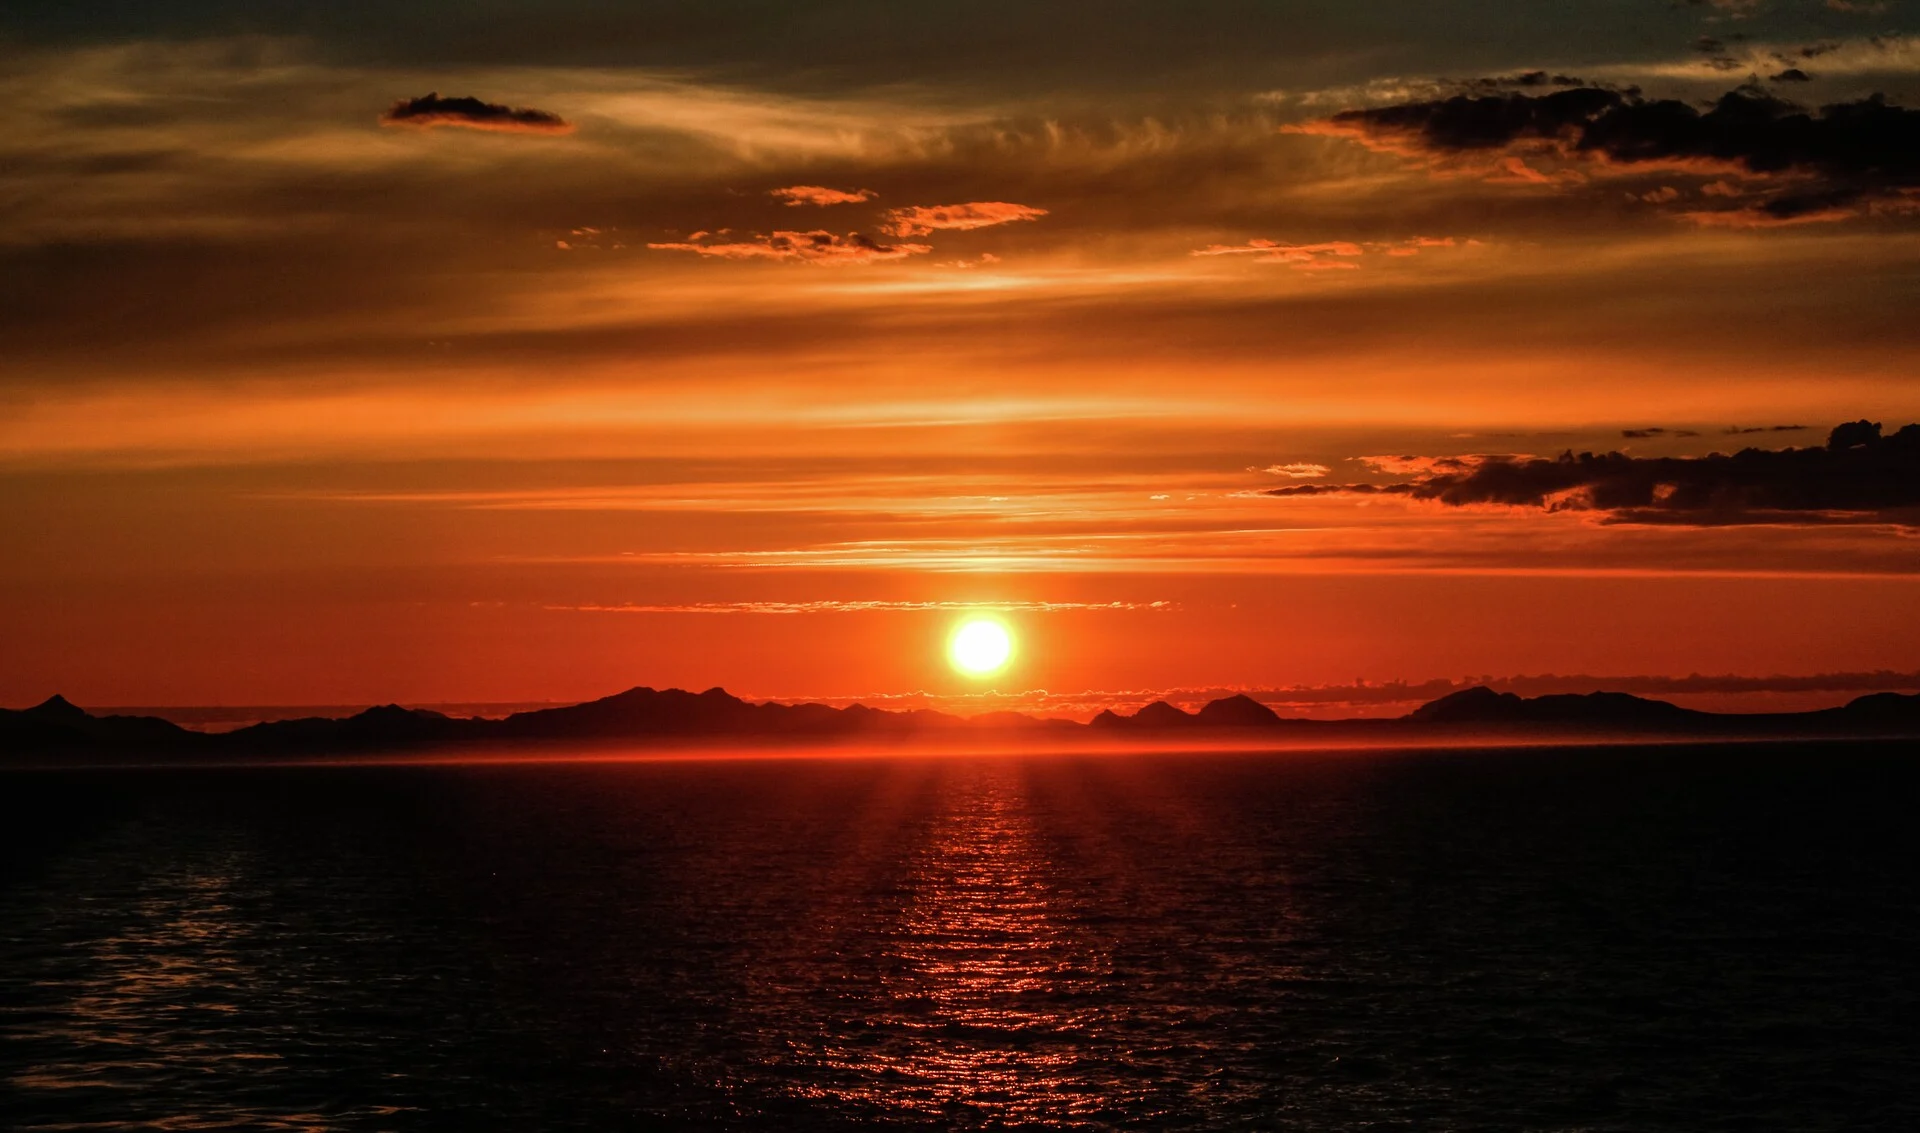 Midnight Sun photographed by Beverle Humphrey for Photo Competition 